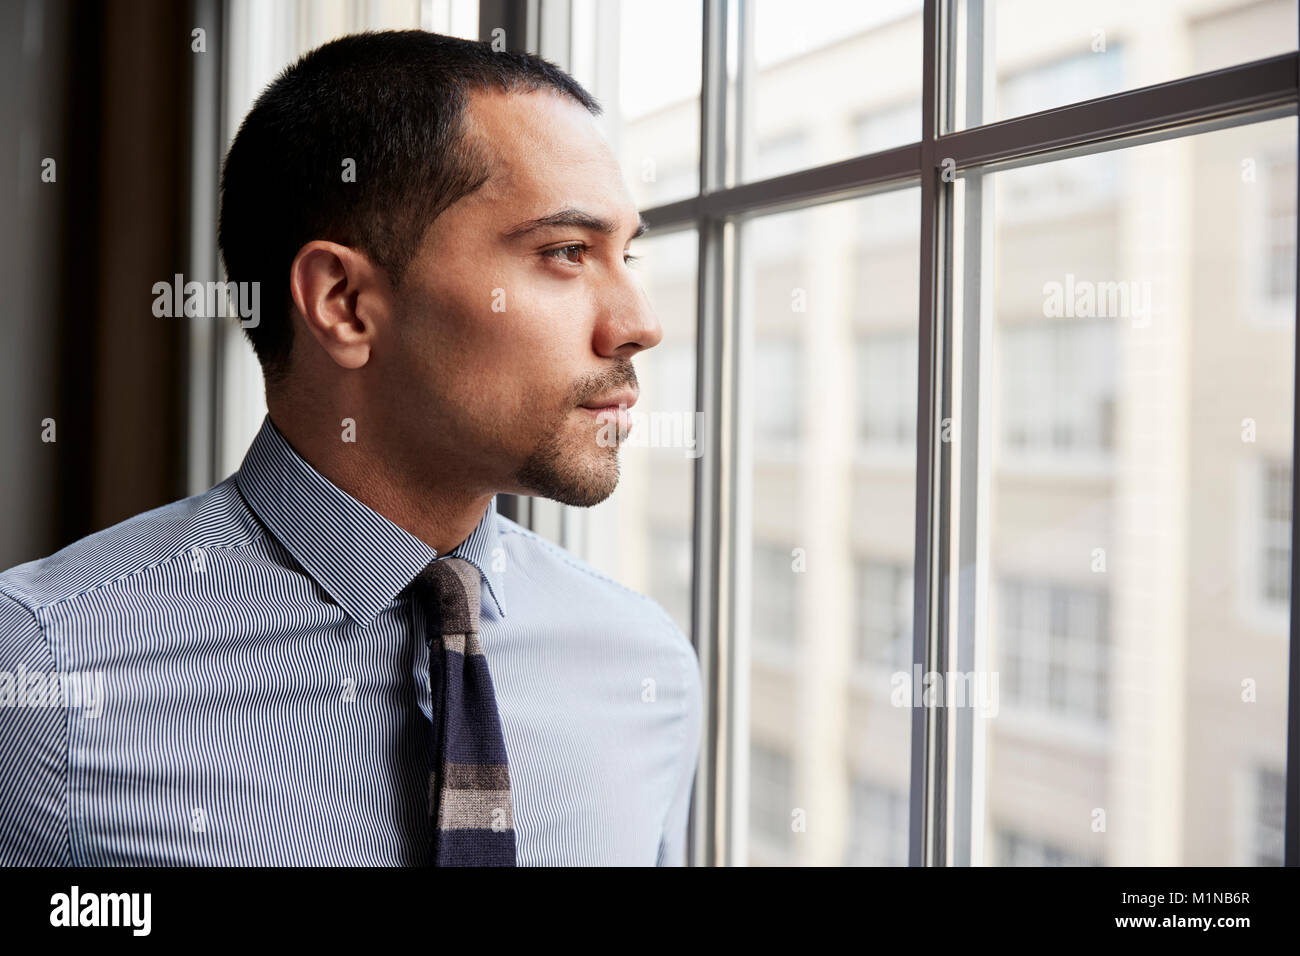 Young Hispanic business man looking out of window Banque D'Images